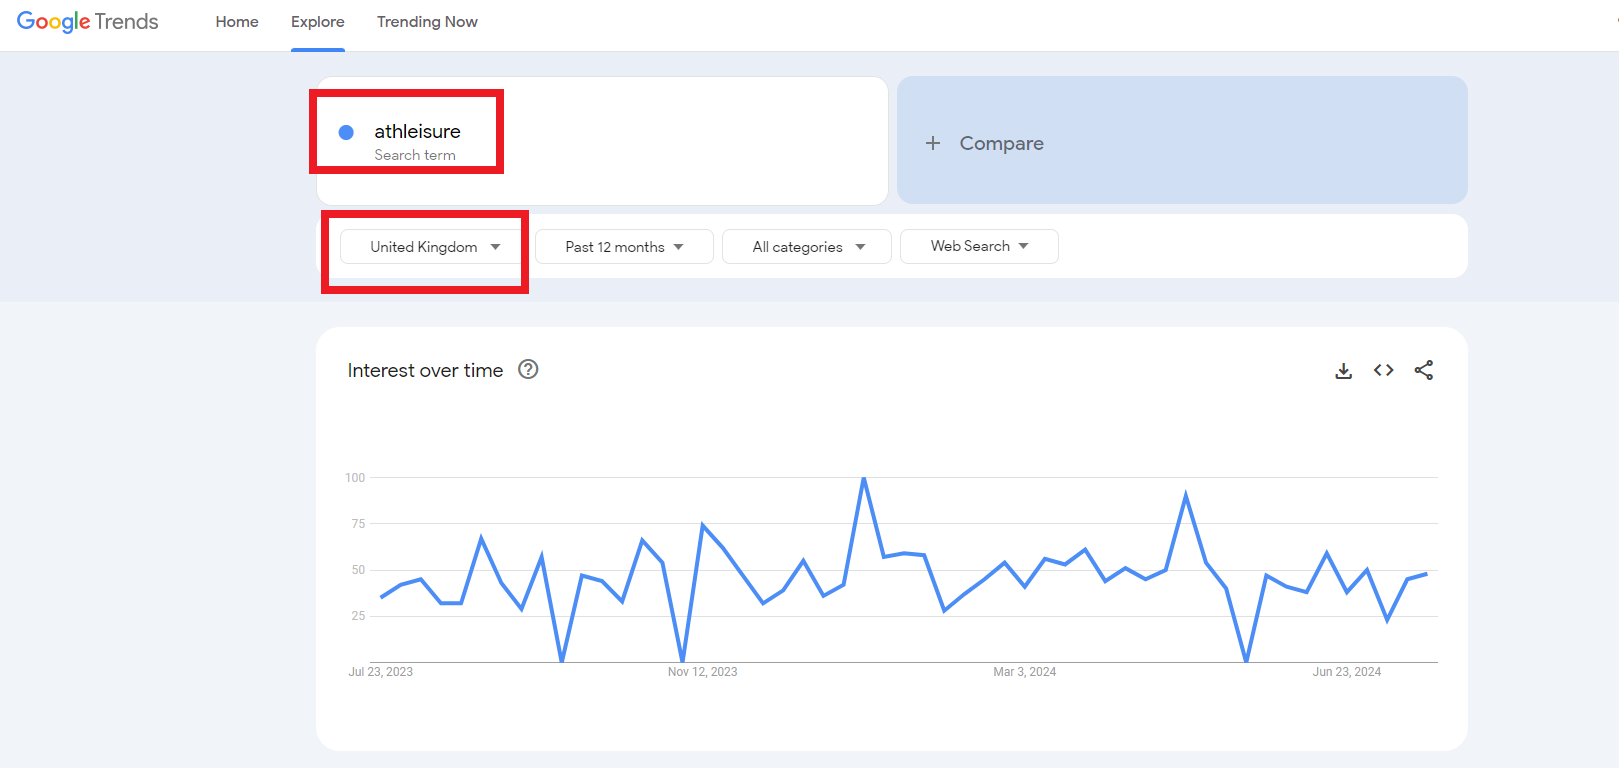 google trends results fot  “athleisure” and set the region to the UK.